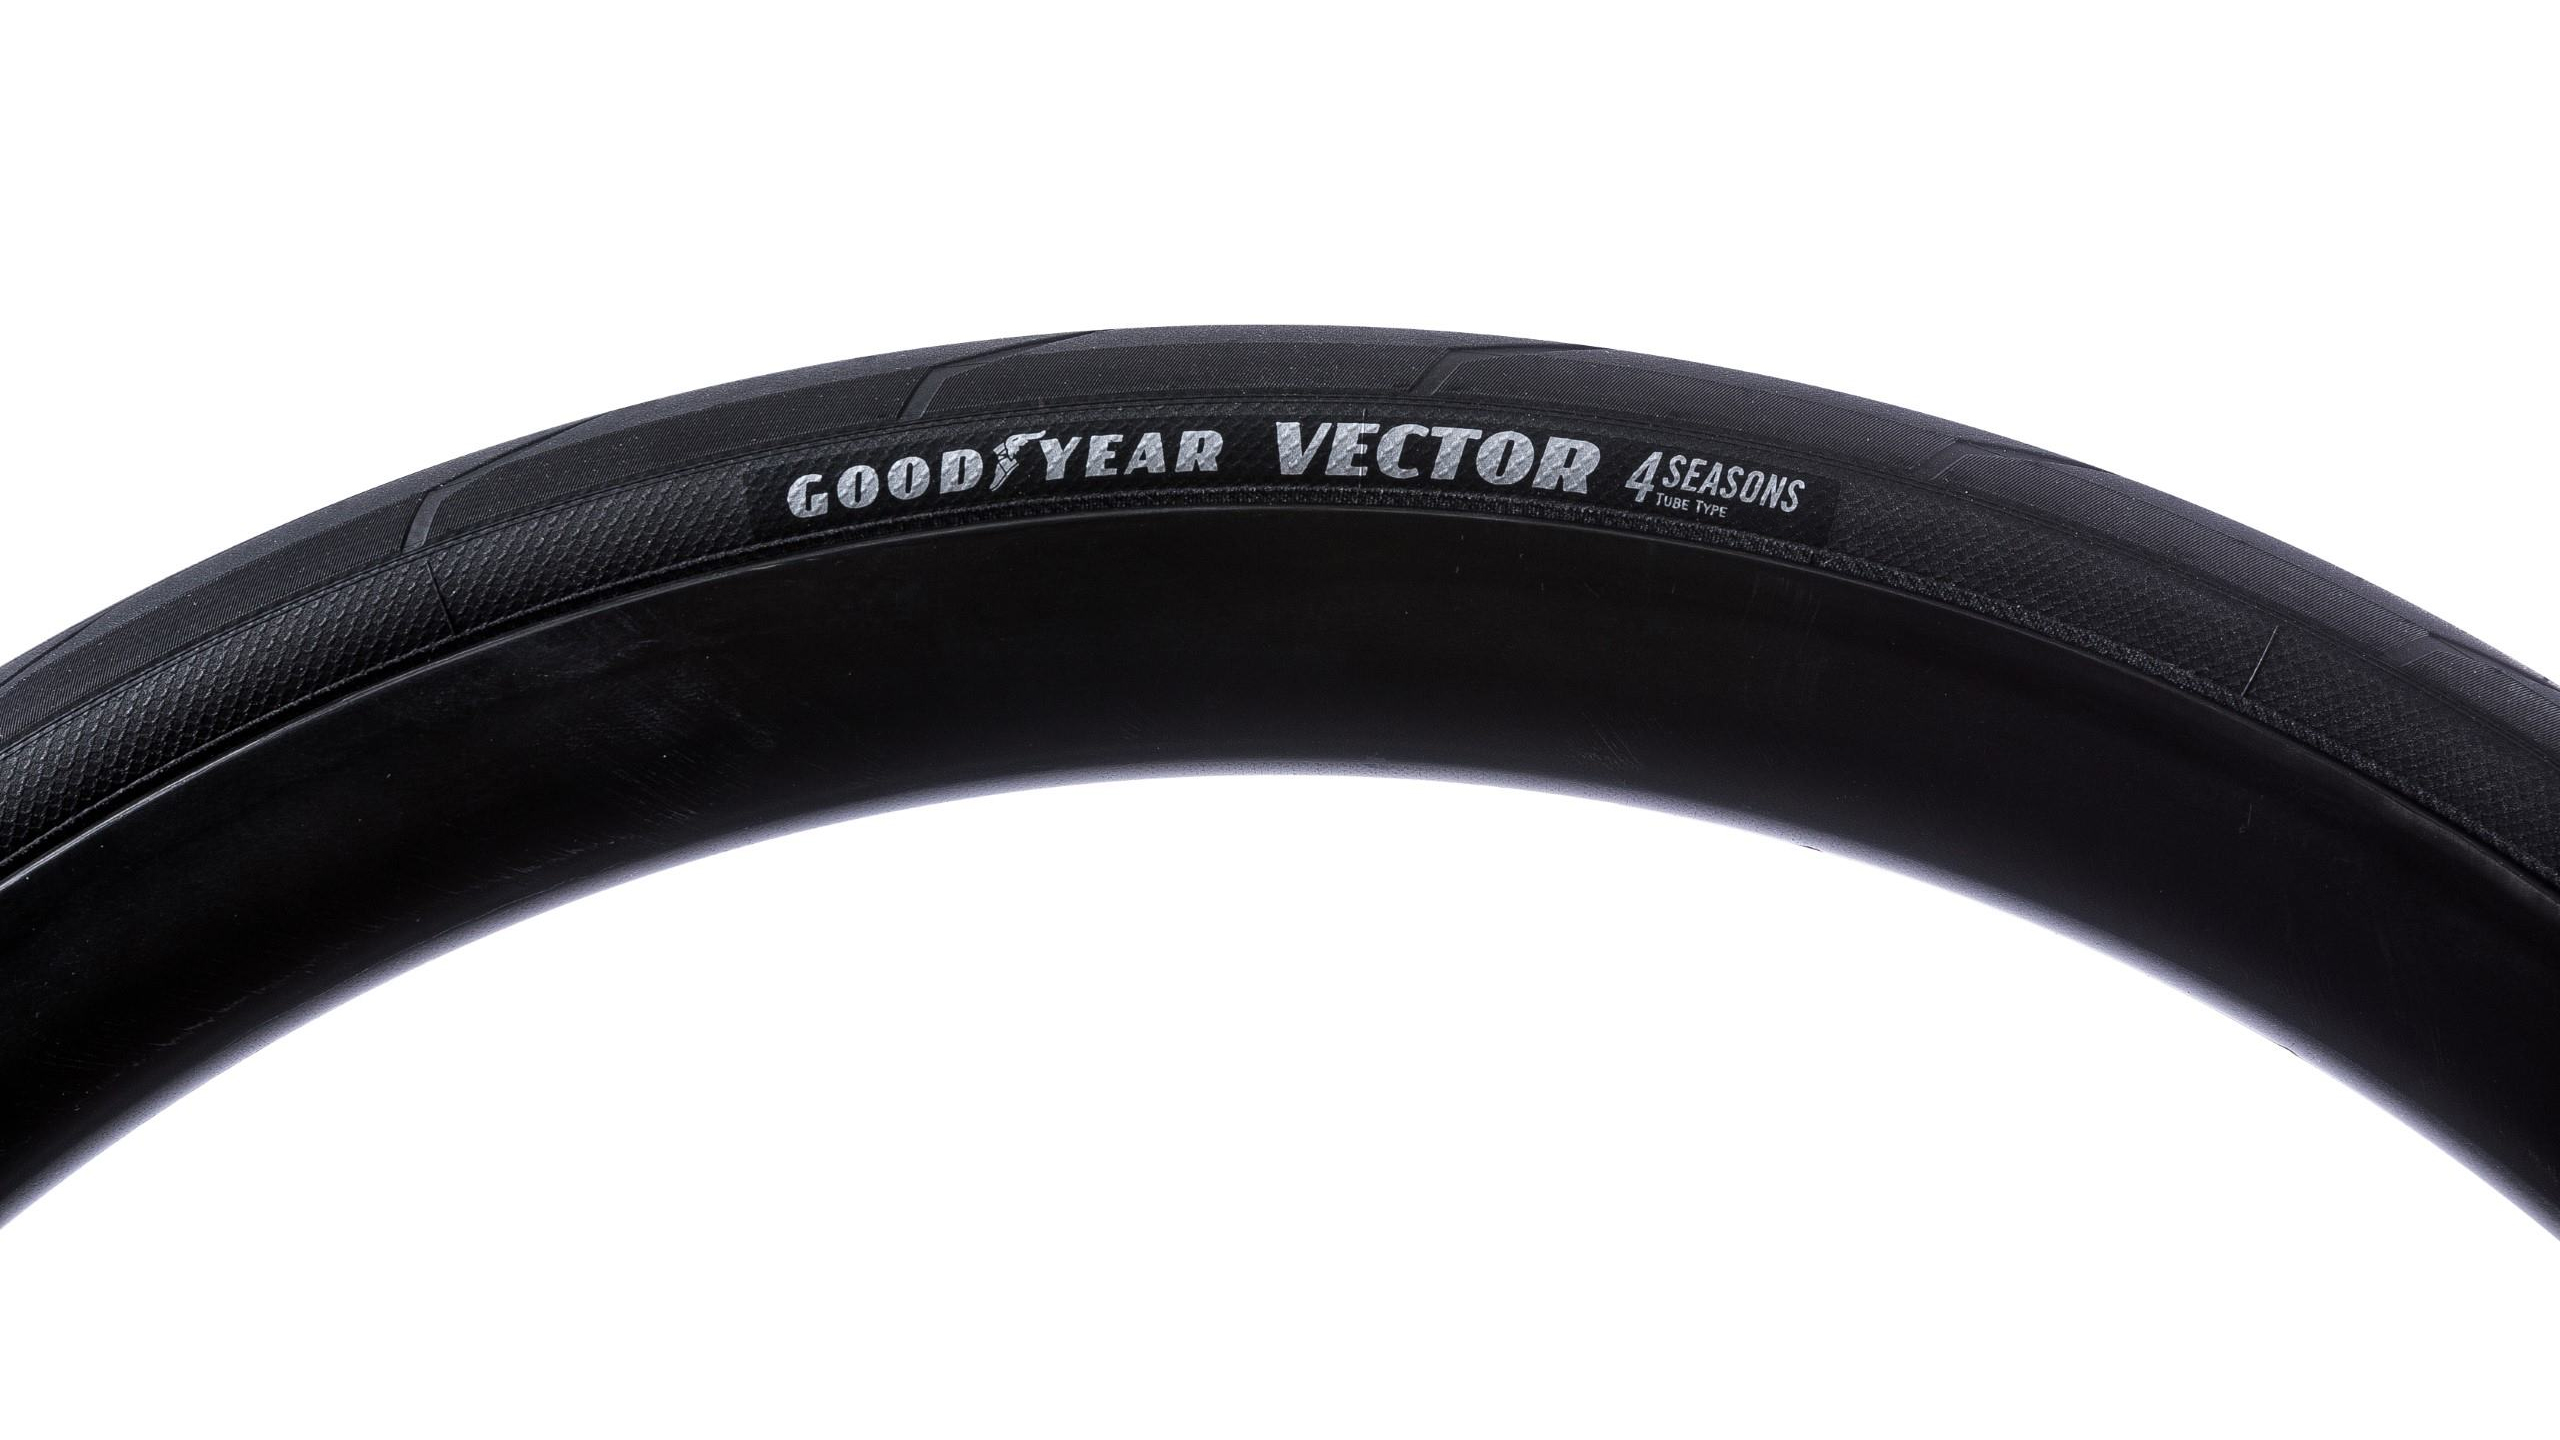 Upgrade your collection with the openairlight 100% Guarantee GOODYEAR  VECTOR 4SEASONS 700C TIRE at a special price